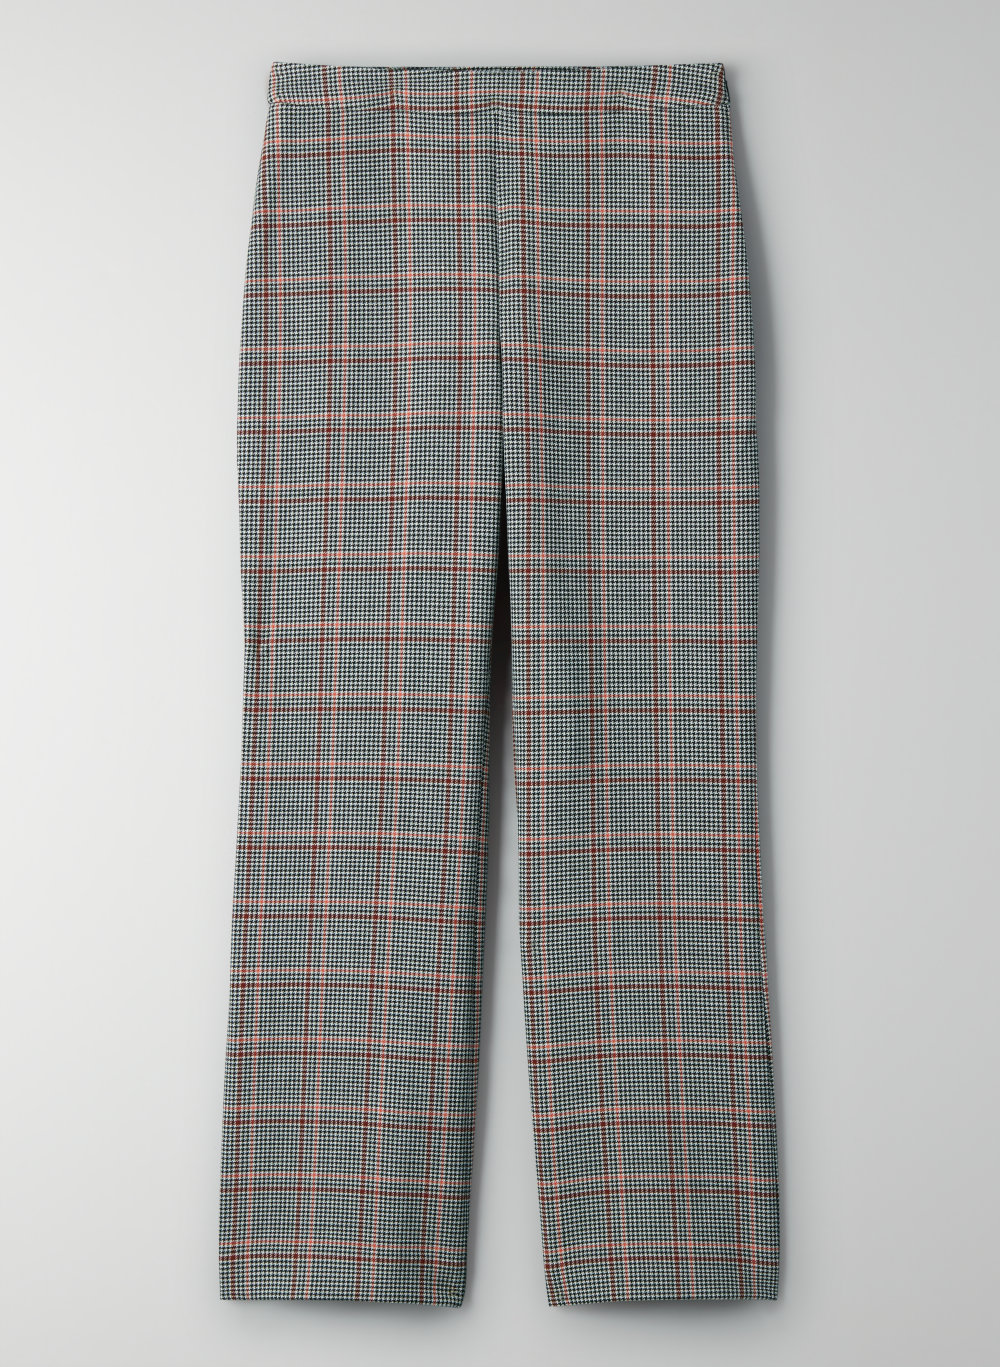 Buy > plaid flare pants > in stock